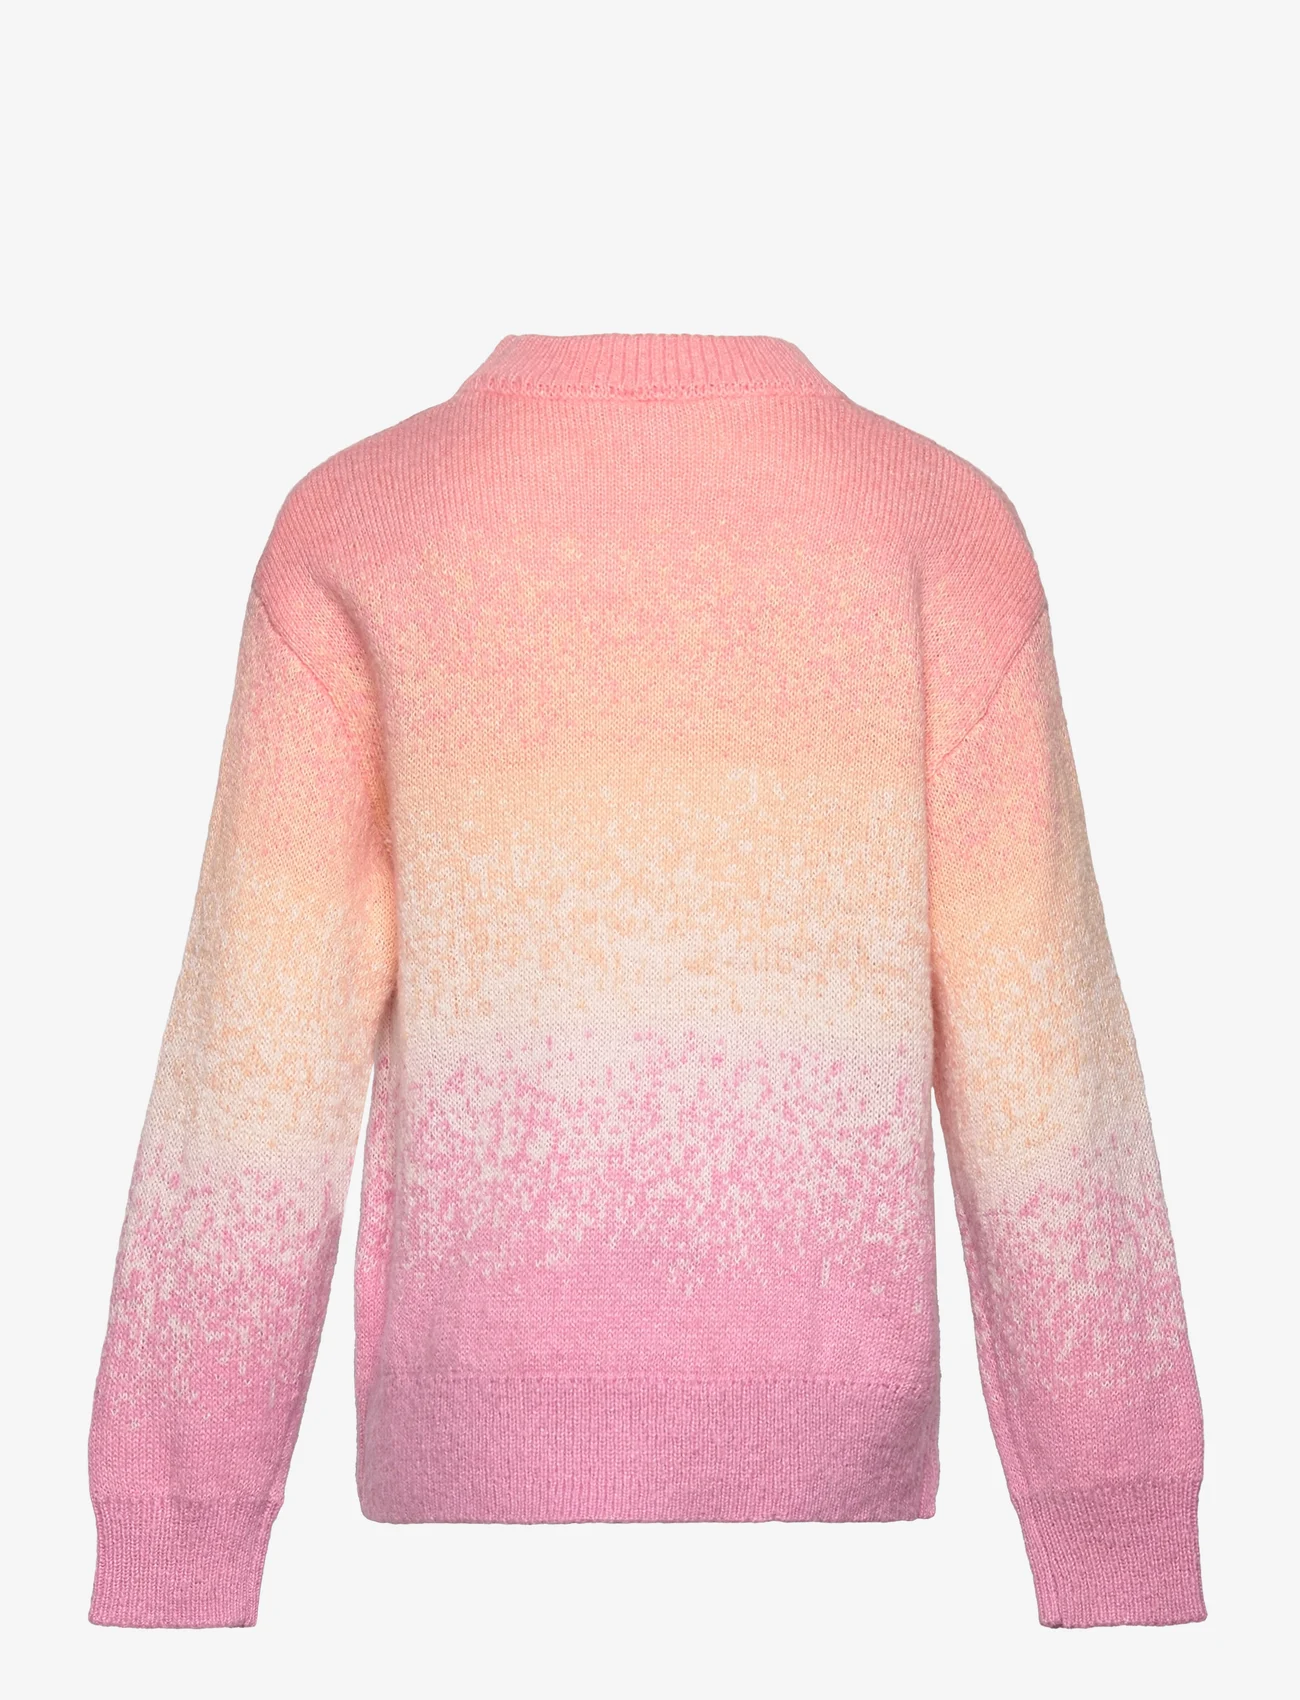 Lindex - Sweater Knitted Graded colors - pullover - pink - 1